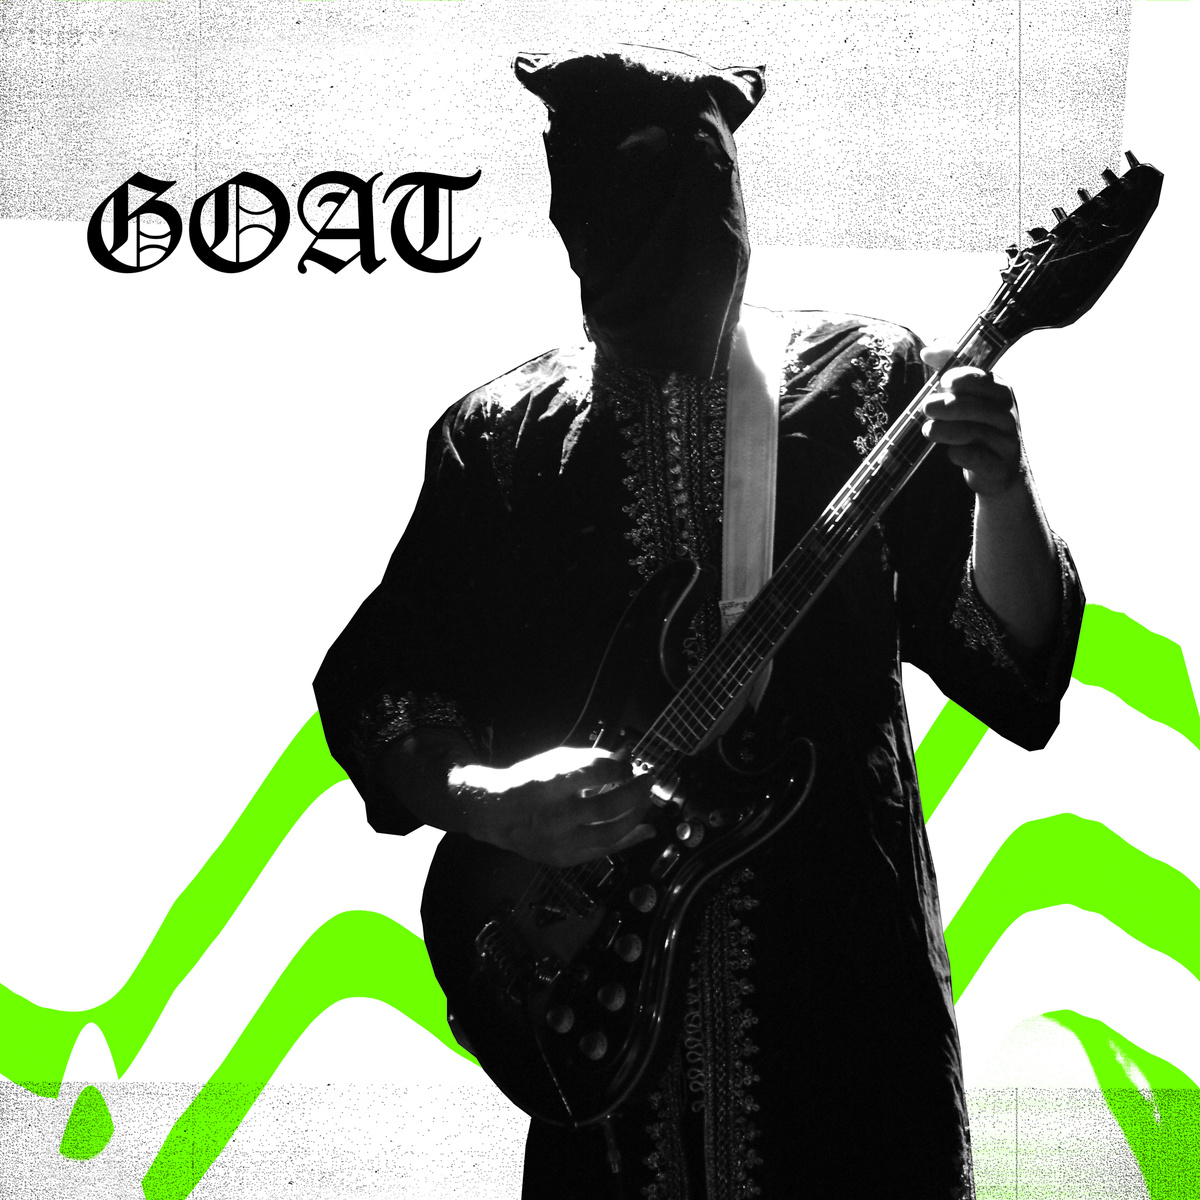 News Added Nov 19, 2013 In August 2012 Swedish band Goat released their debut album, World Music. The record went on to become one of the most talked about albums of the year, topping many ‘Best of 2012’ lists and the following year, the band took the album on the road. Starting off a triumphant […]